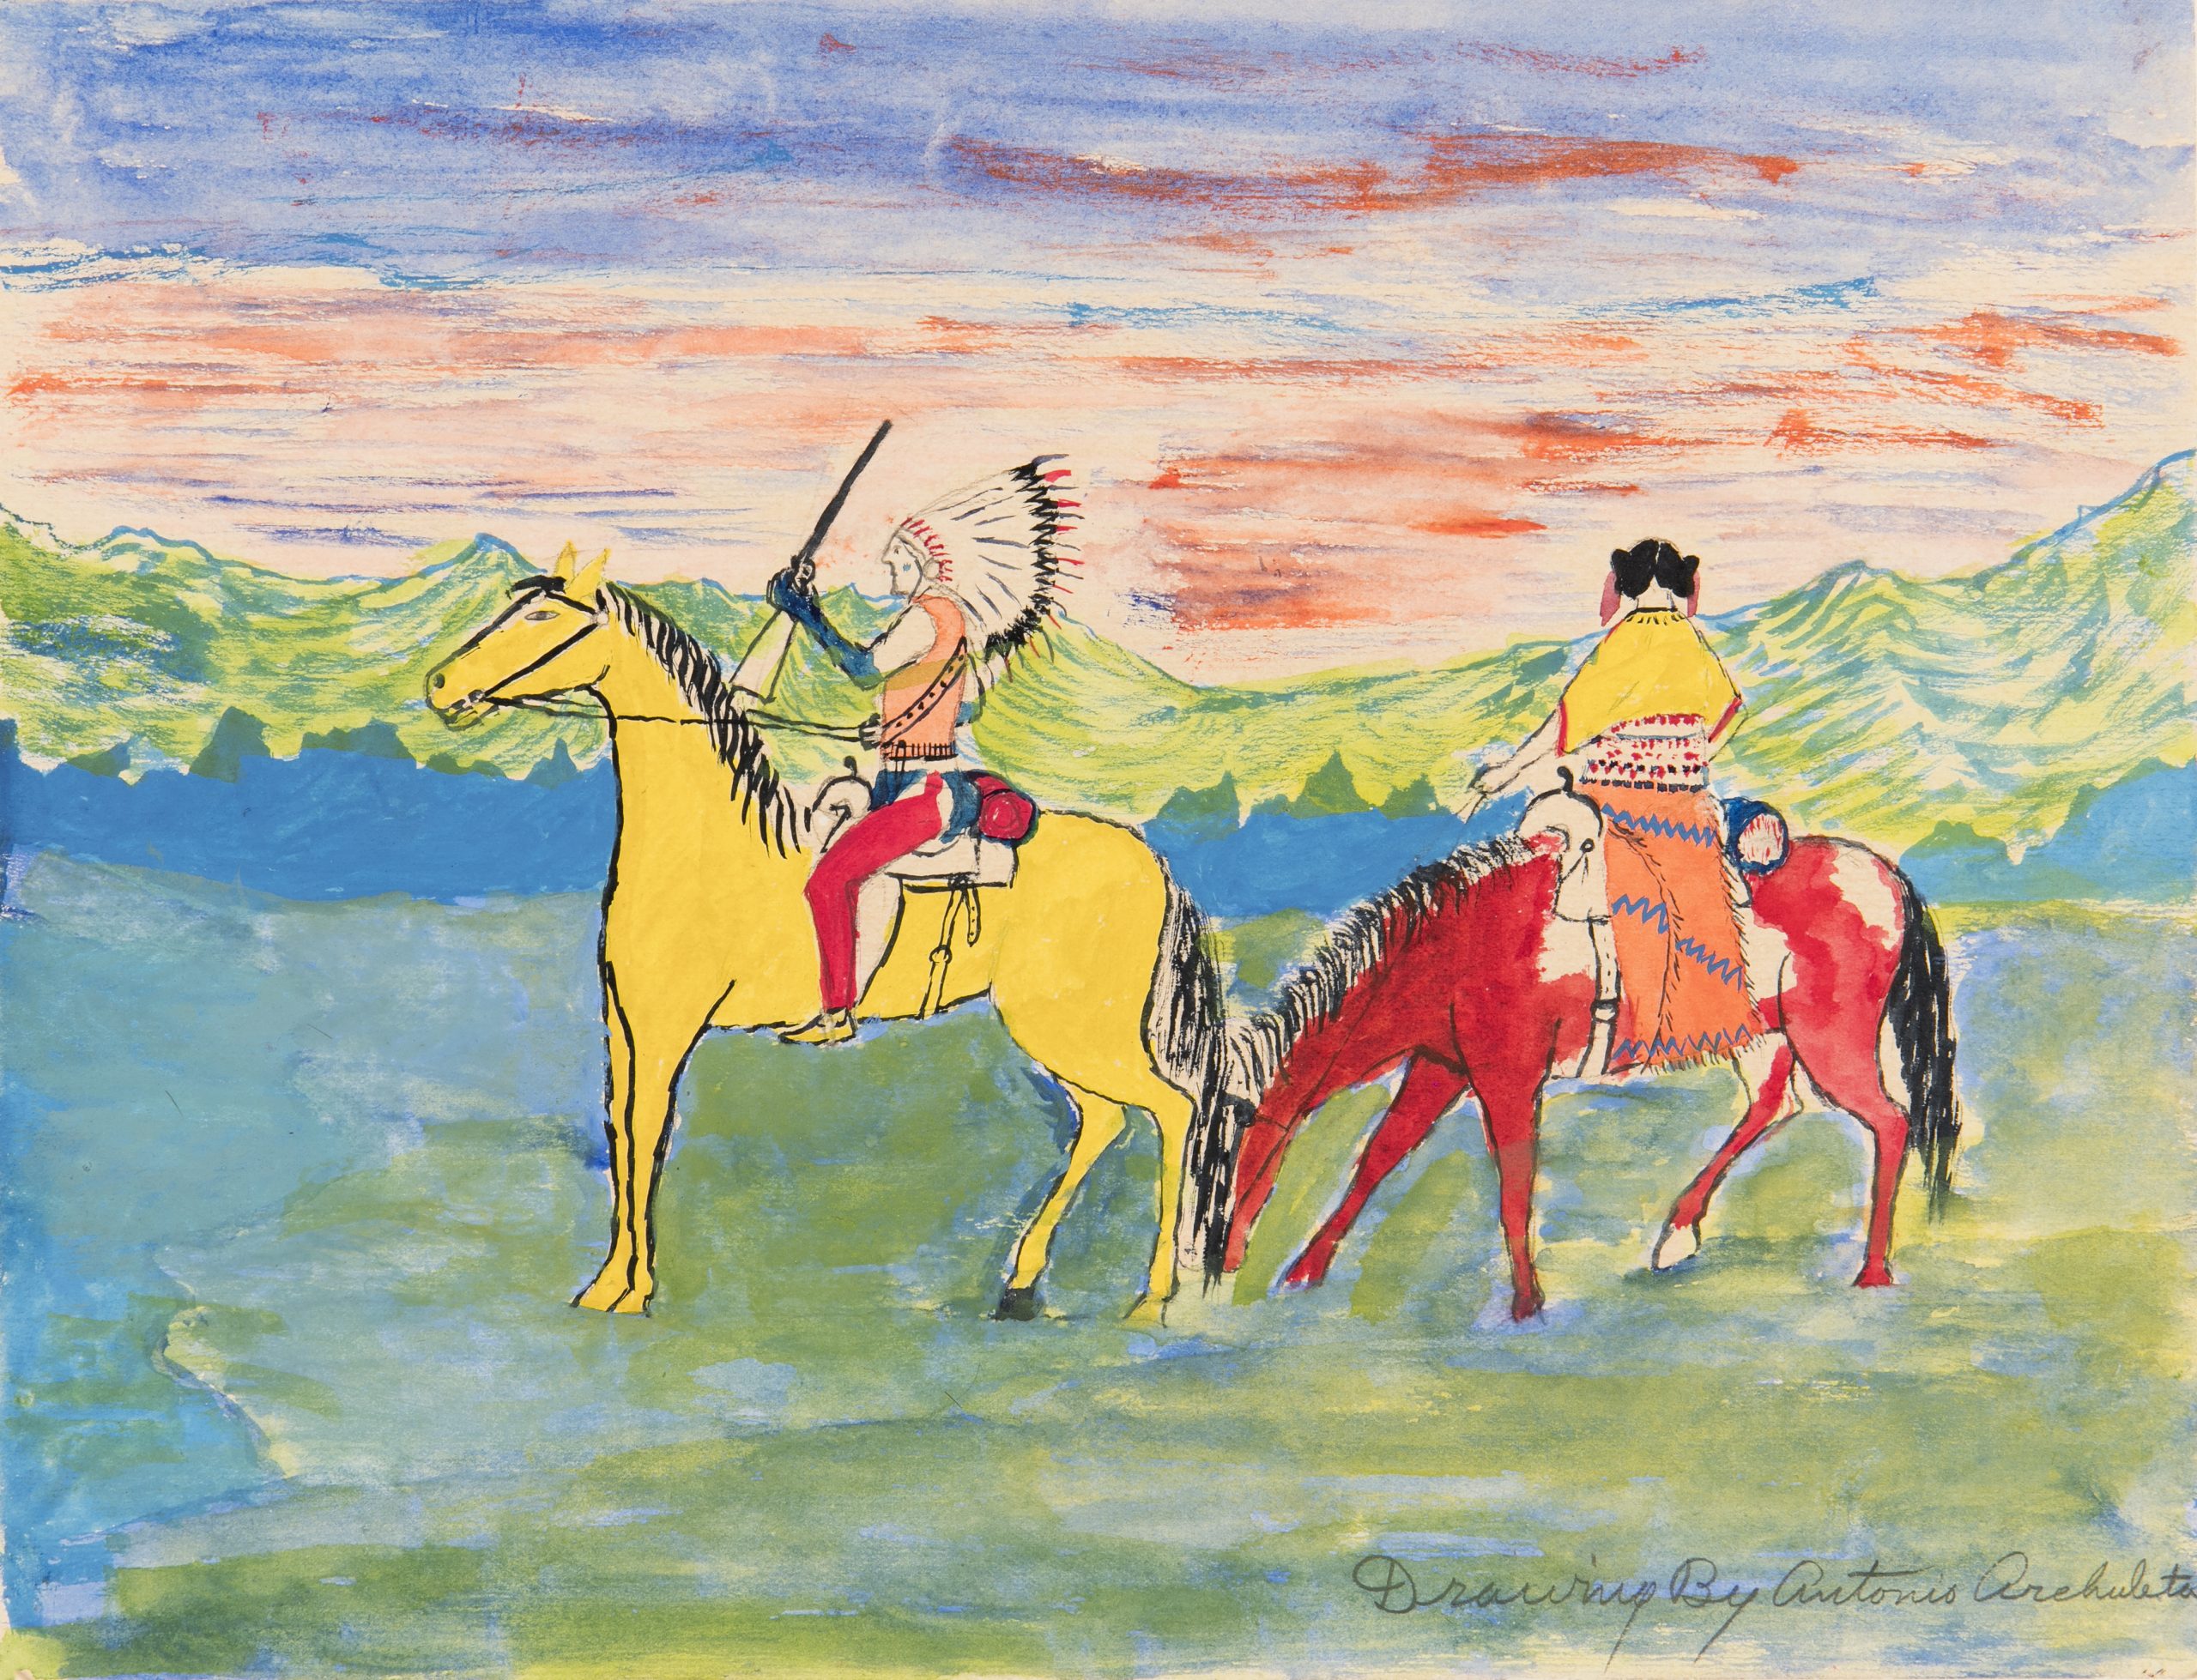 Antonio Archuleta. "Indians on Horseback", before 1933. Wove paper, watercolor. 8 ¼ × 10 ⅞  IAF.P35. Photograph by Addison Doty. Copyright 2018 School for Advanced Research.